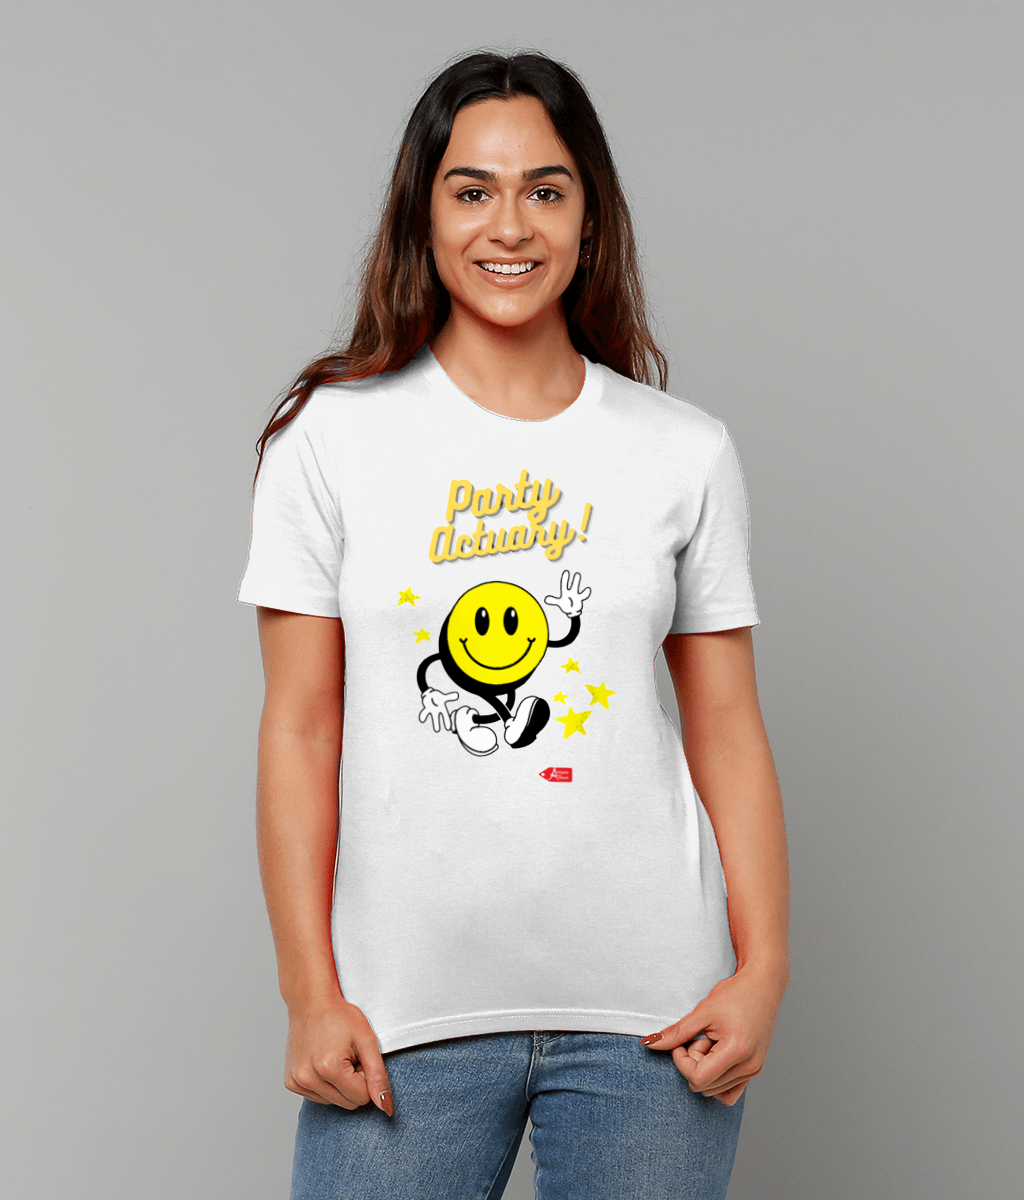 Party Actuary Yellow Cheerful Good Times T-Shirt (Grey and White Variants)